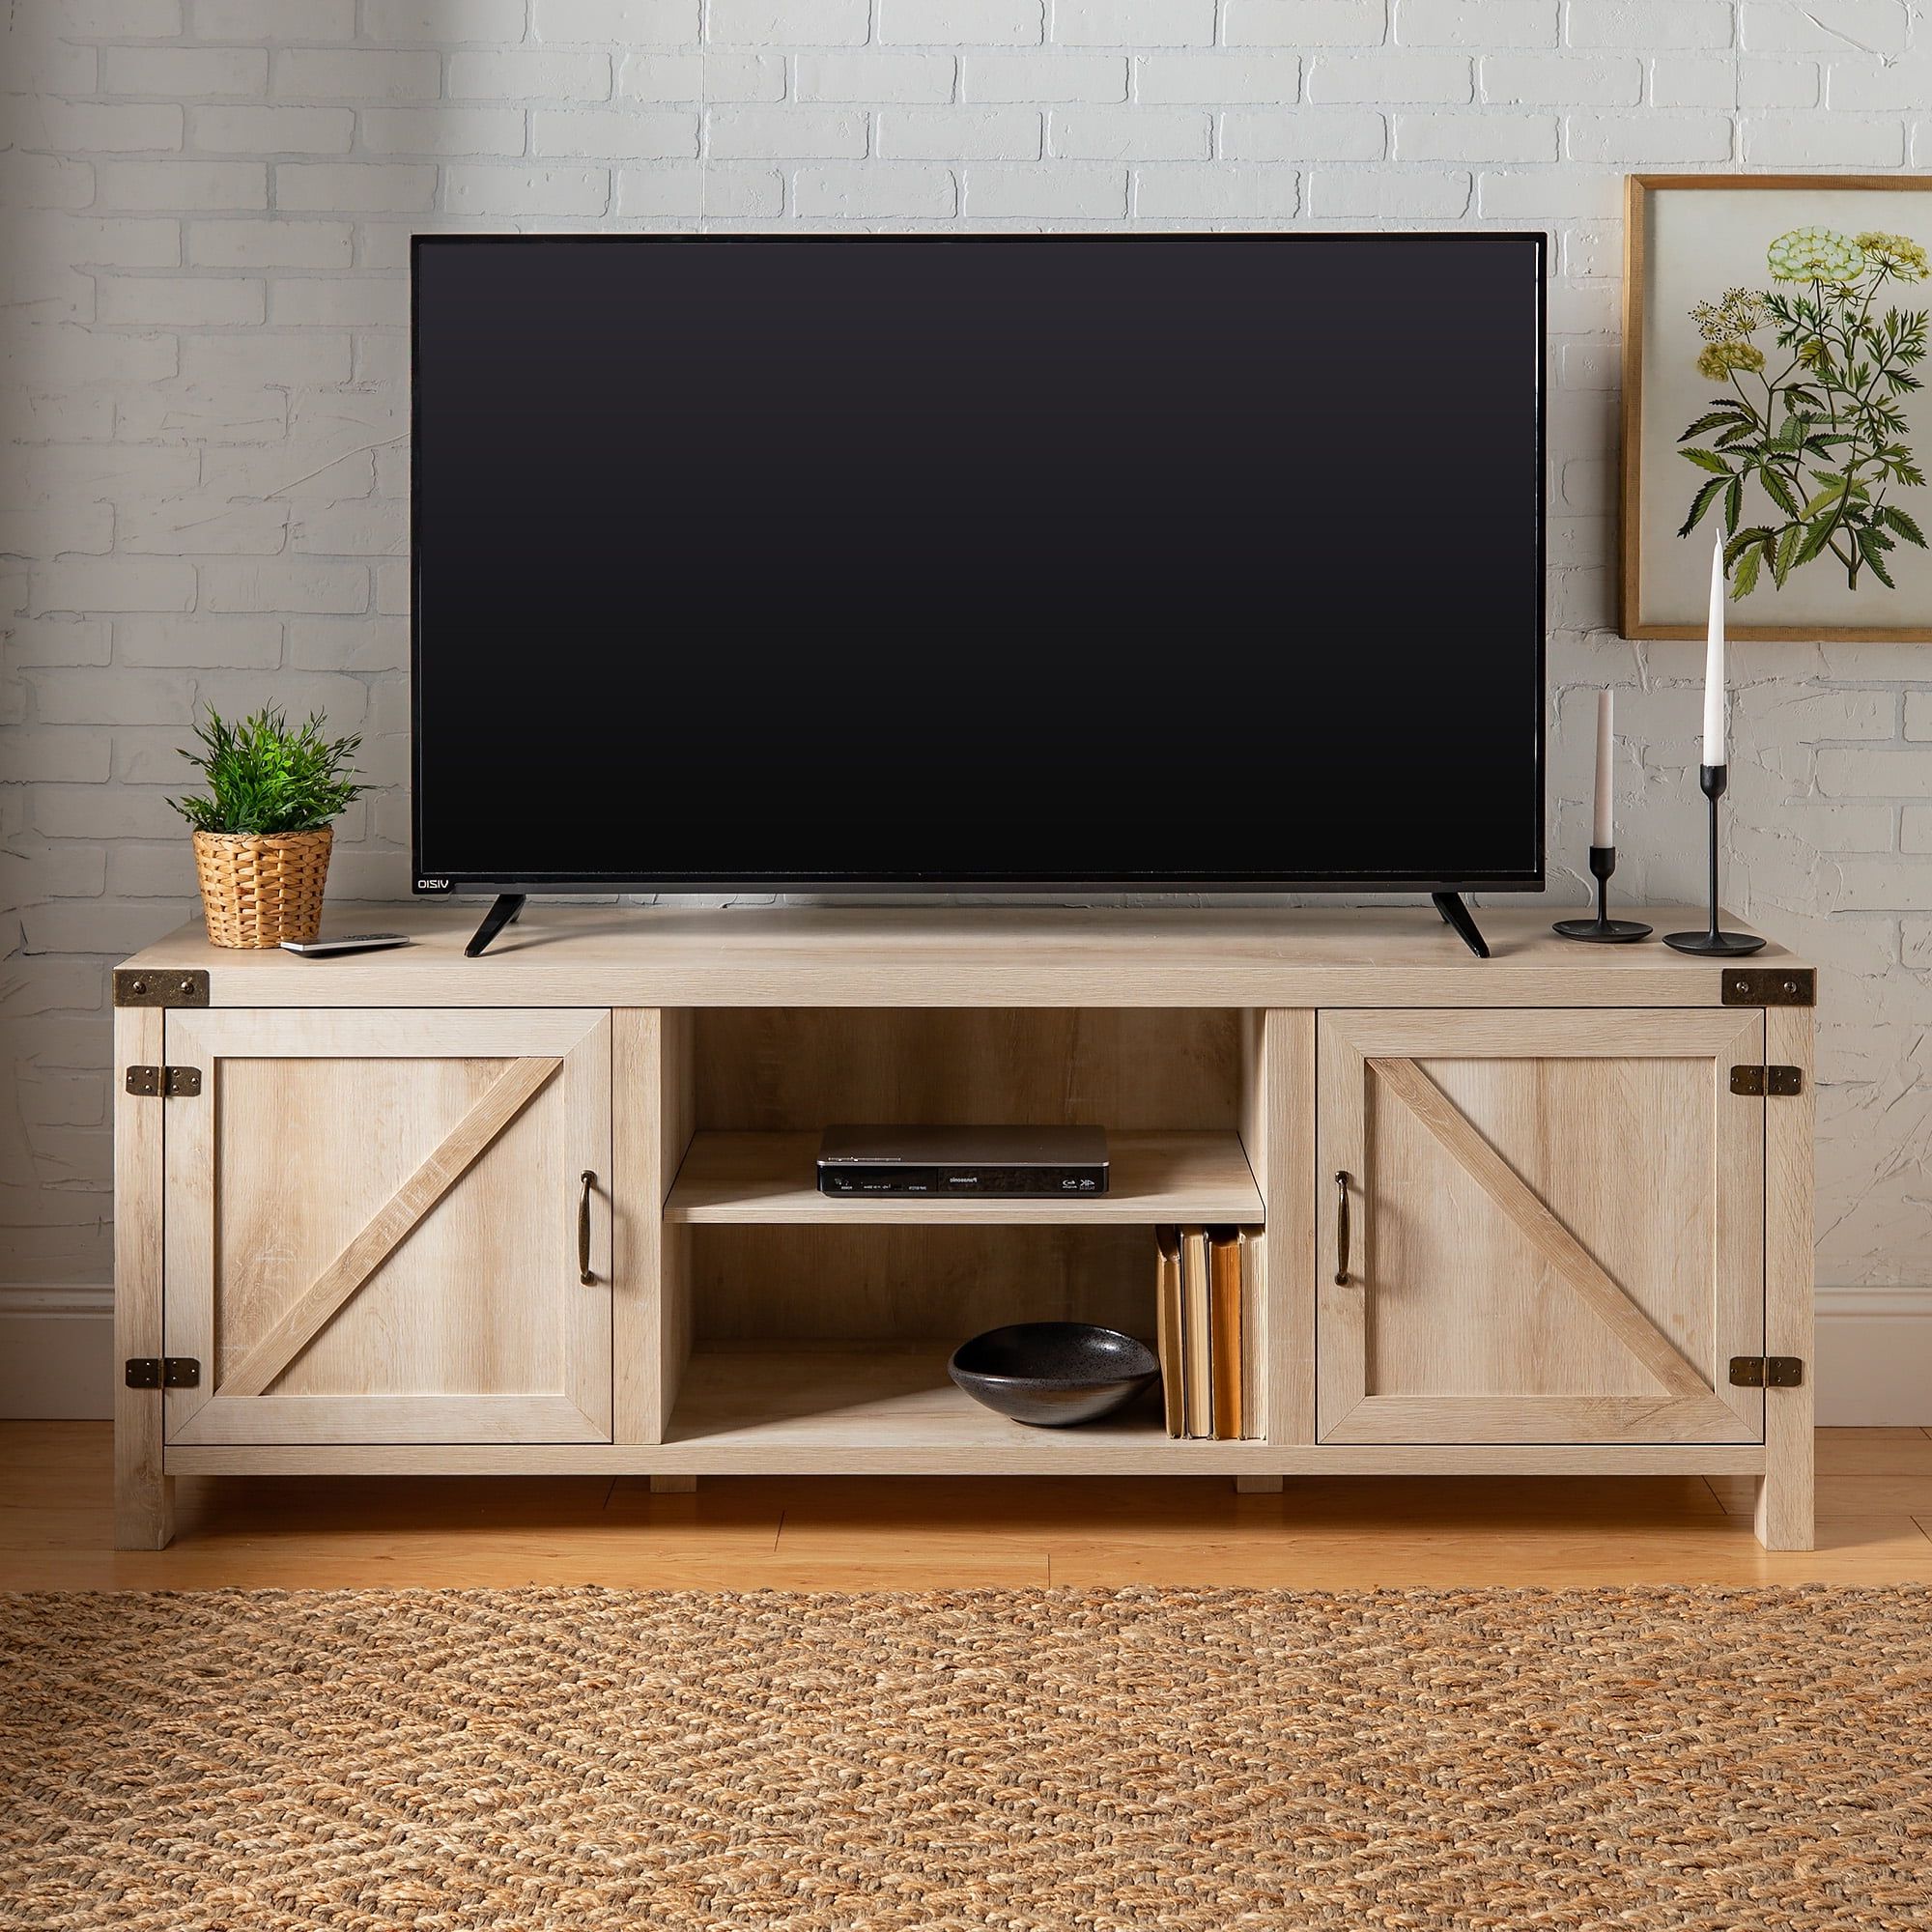 Farmhouse Stands For Tvs Within Favorite Woven Paths Farmhouse Barn Door Tv Stand For Tvs Up To 80", White Oak (View 2 of 15)